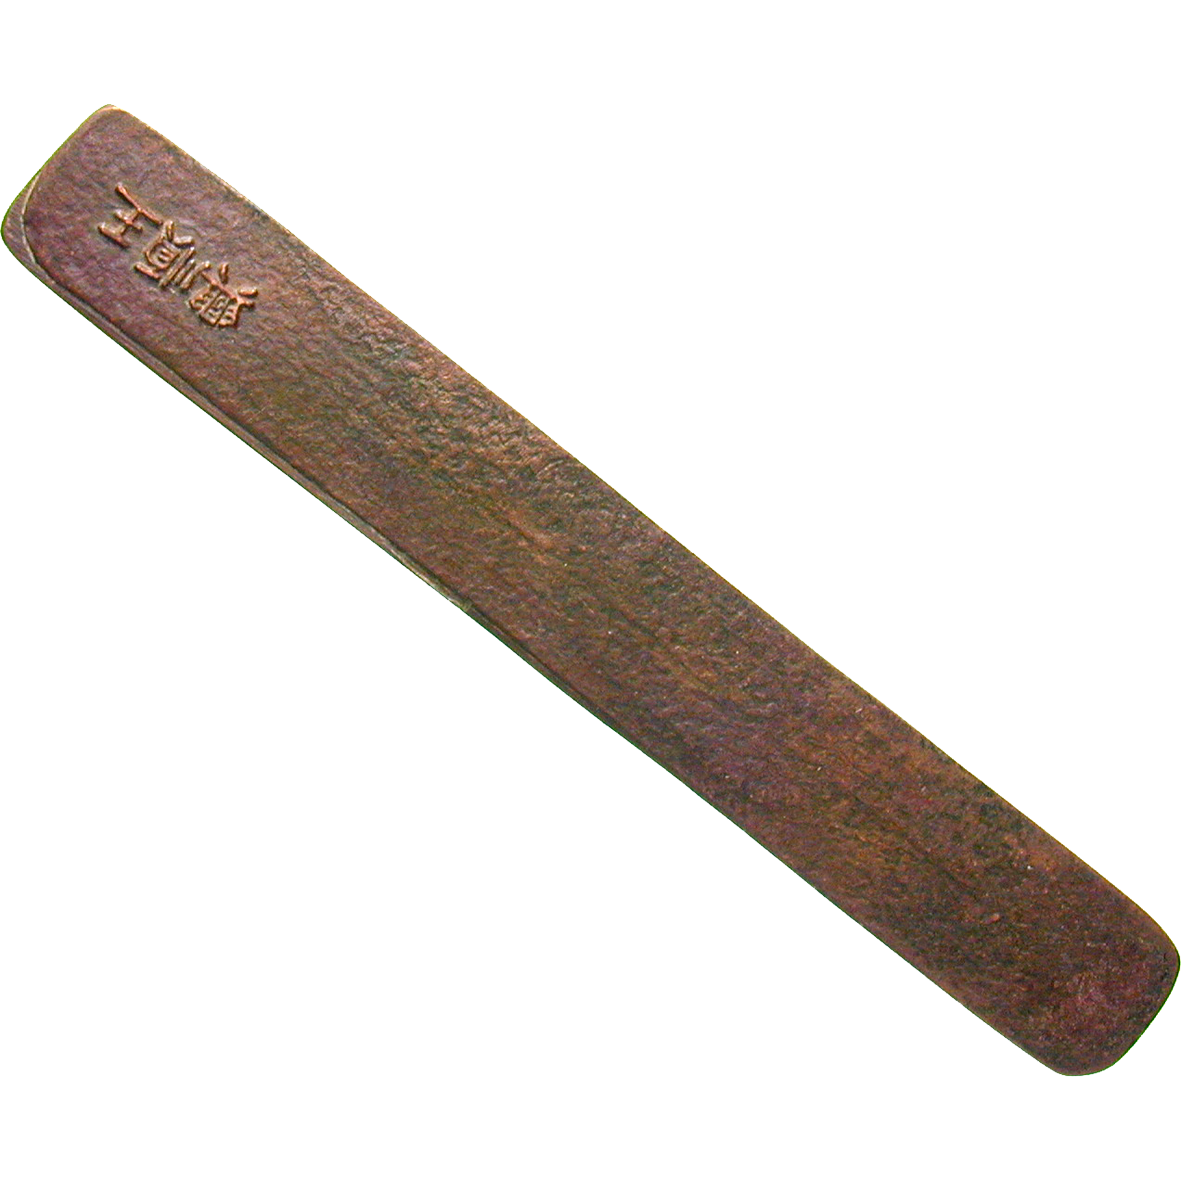 Chinese Empire, Qing Dynasty, Tally Stick worth 50 Cent (reverse)